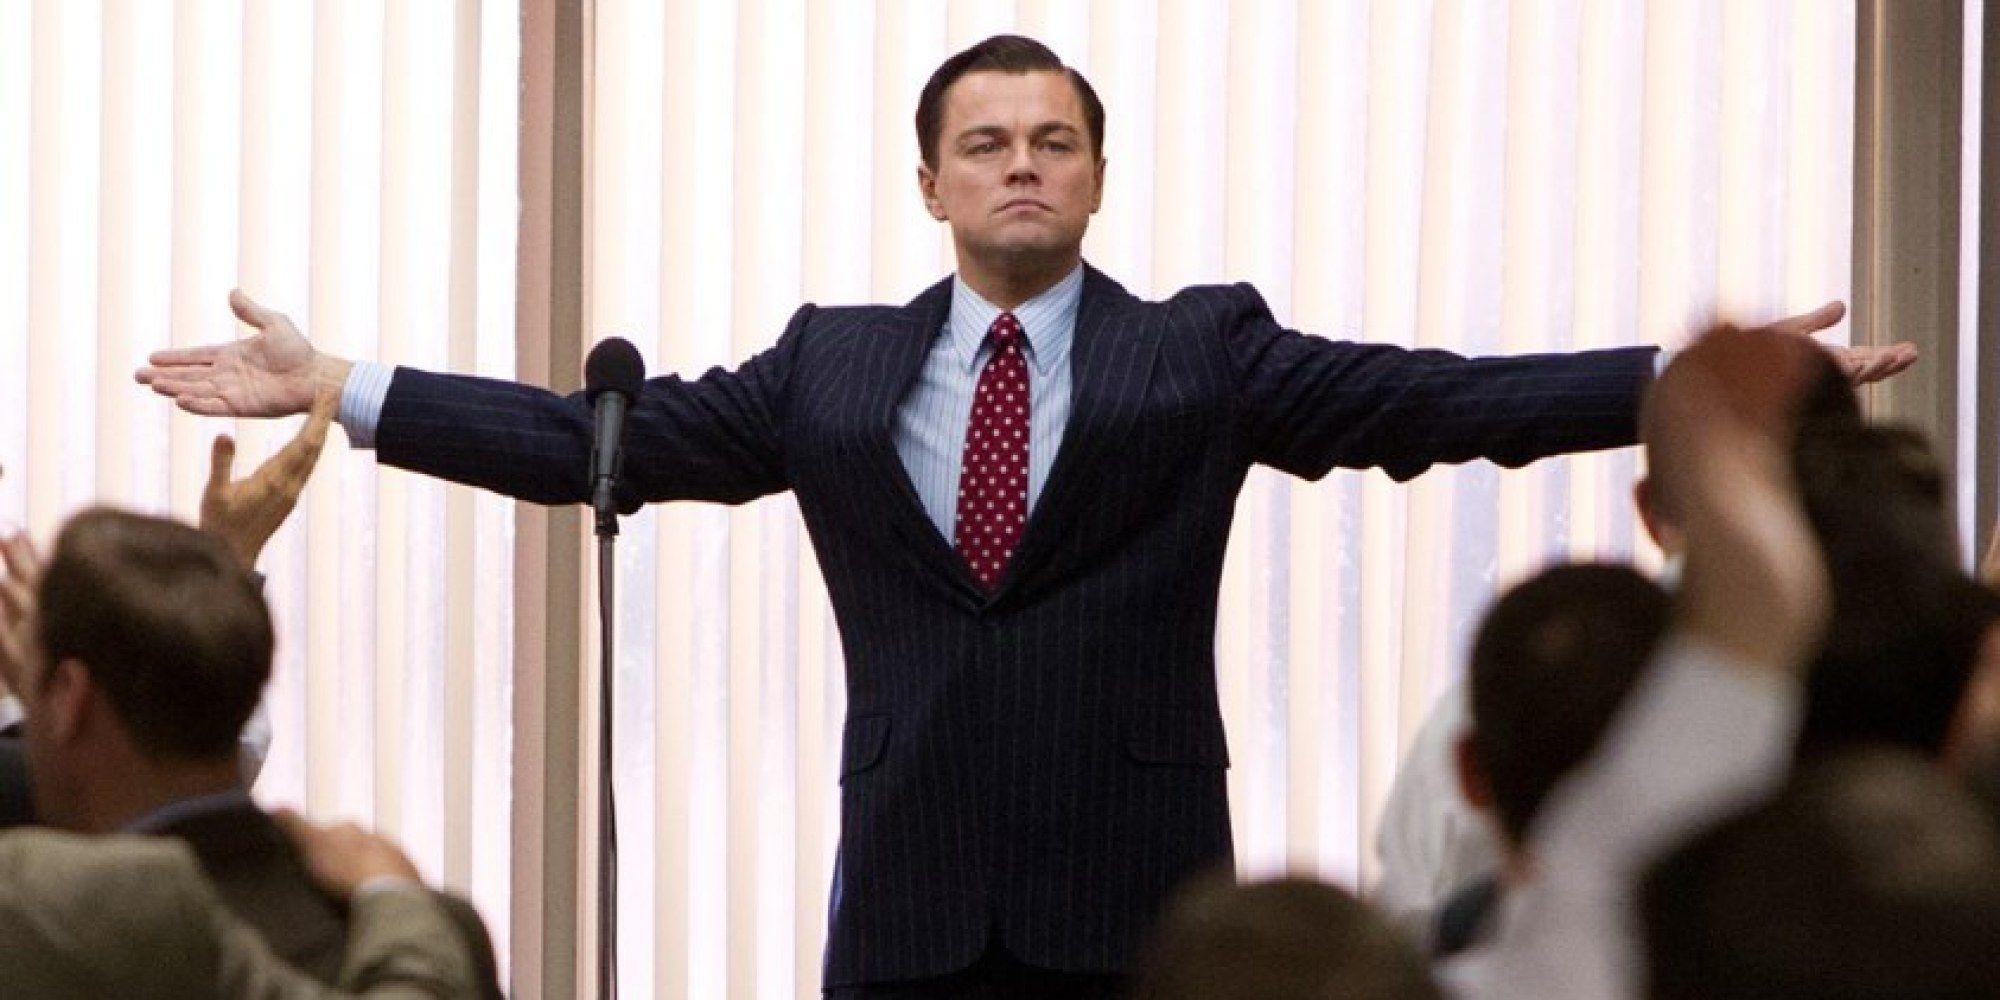 2000x1000px The Wolf Of Wall Street 220.29 KB